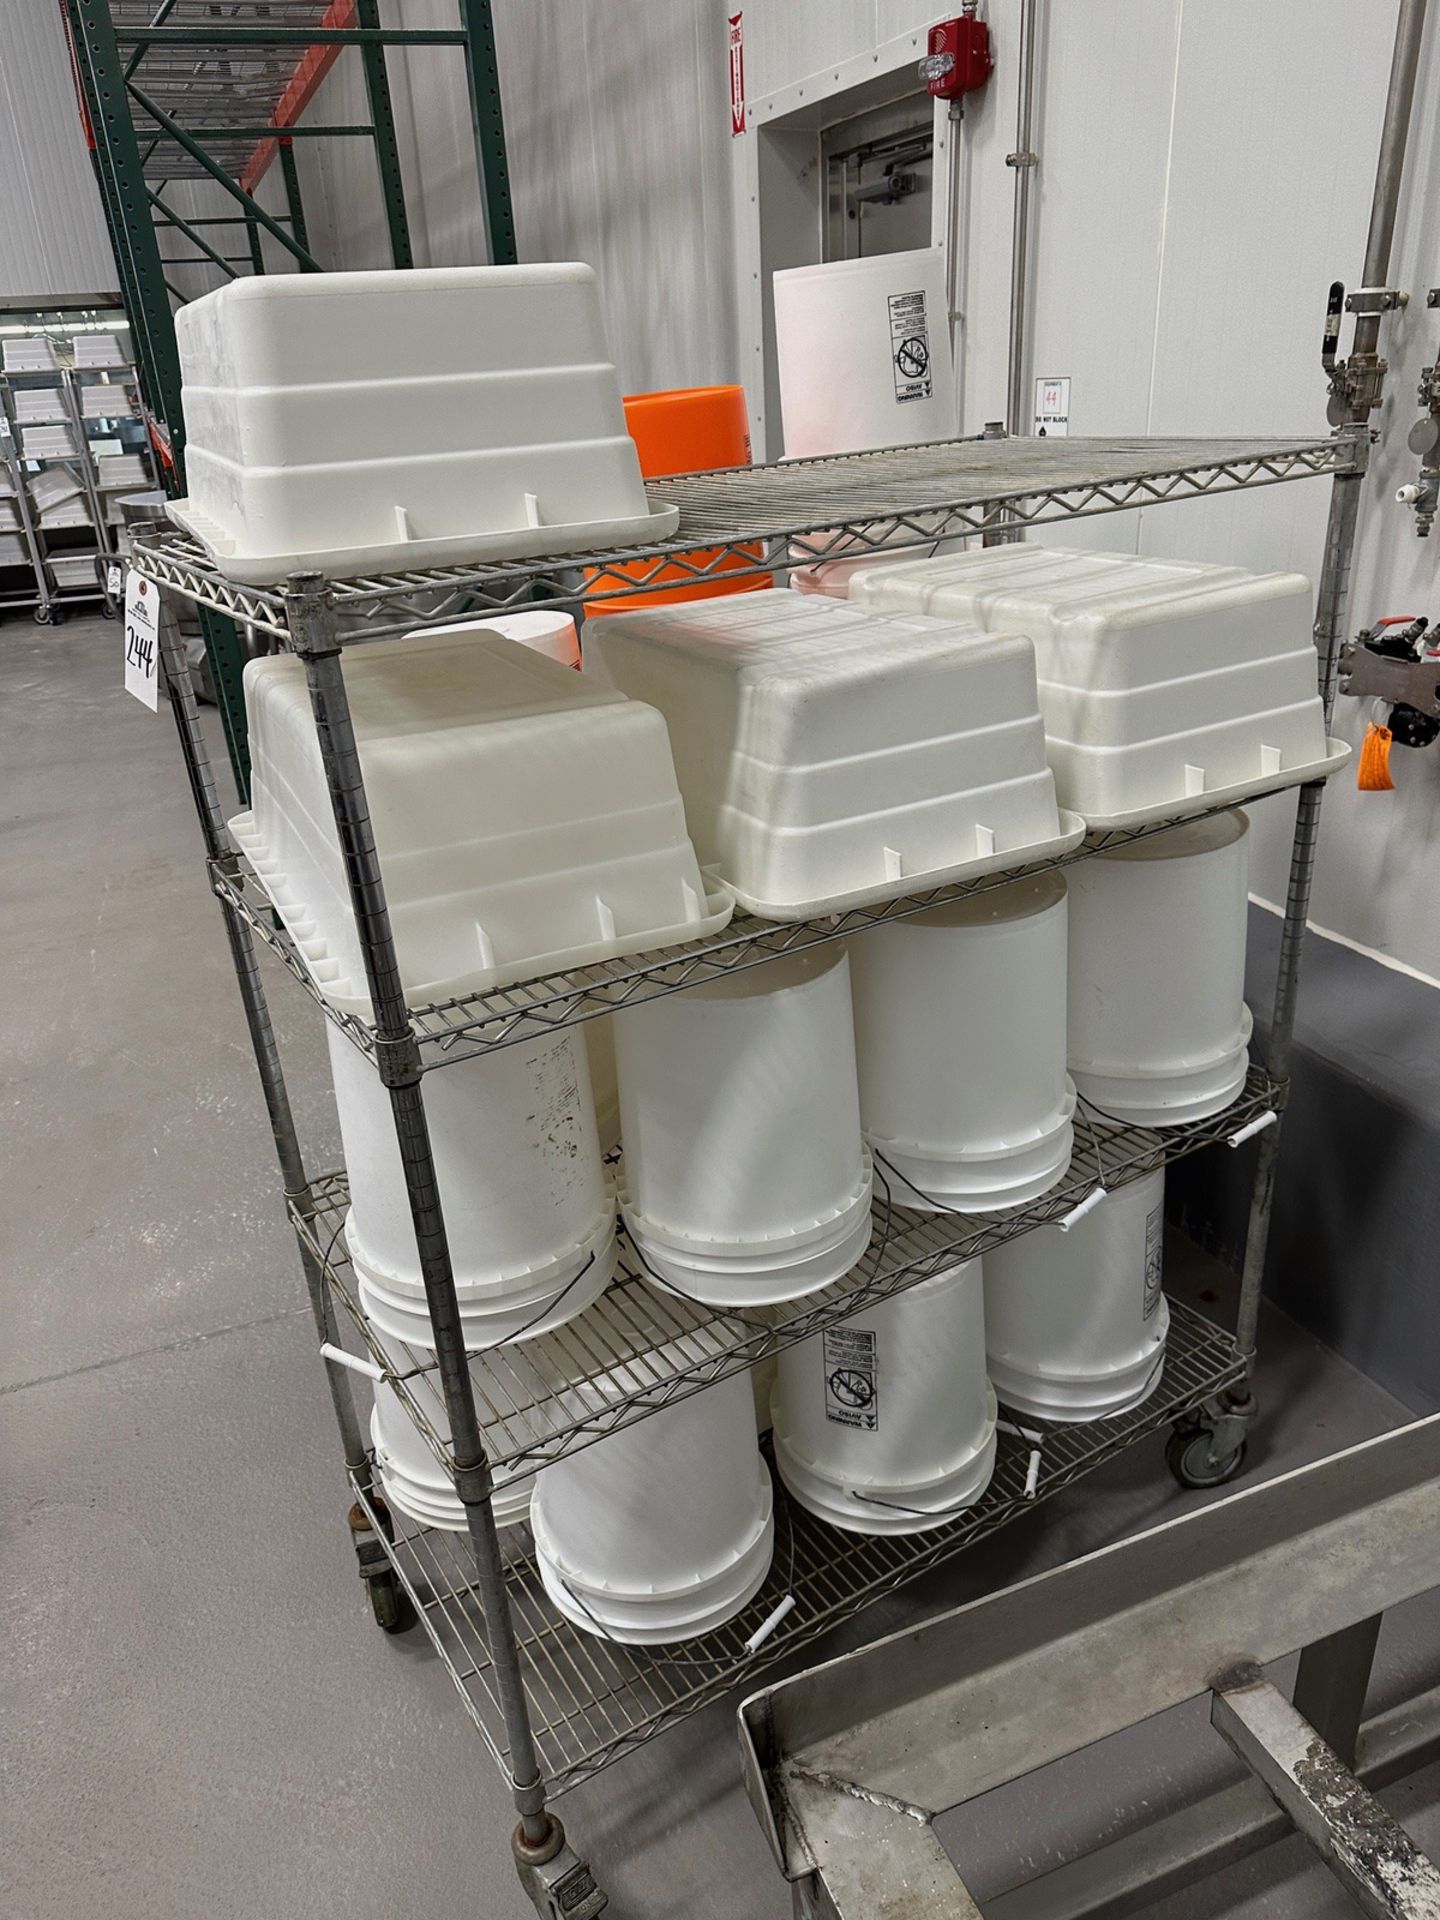 Lot of White Plastic Bins and Buckets with Carts | Rig Fee $75 - Image 2 of 2